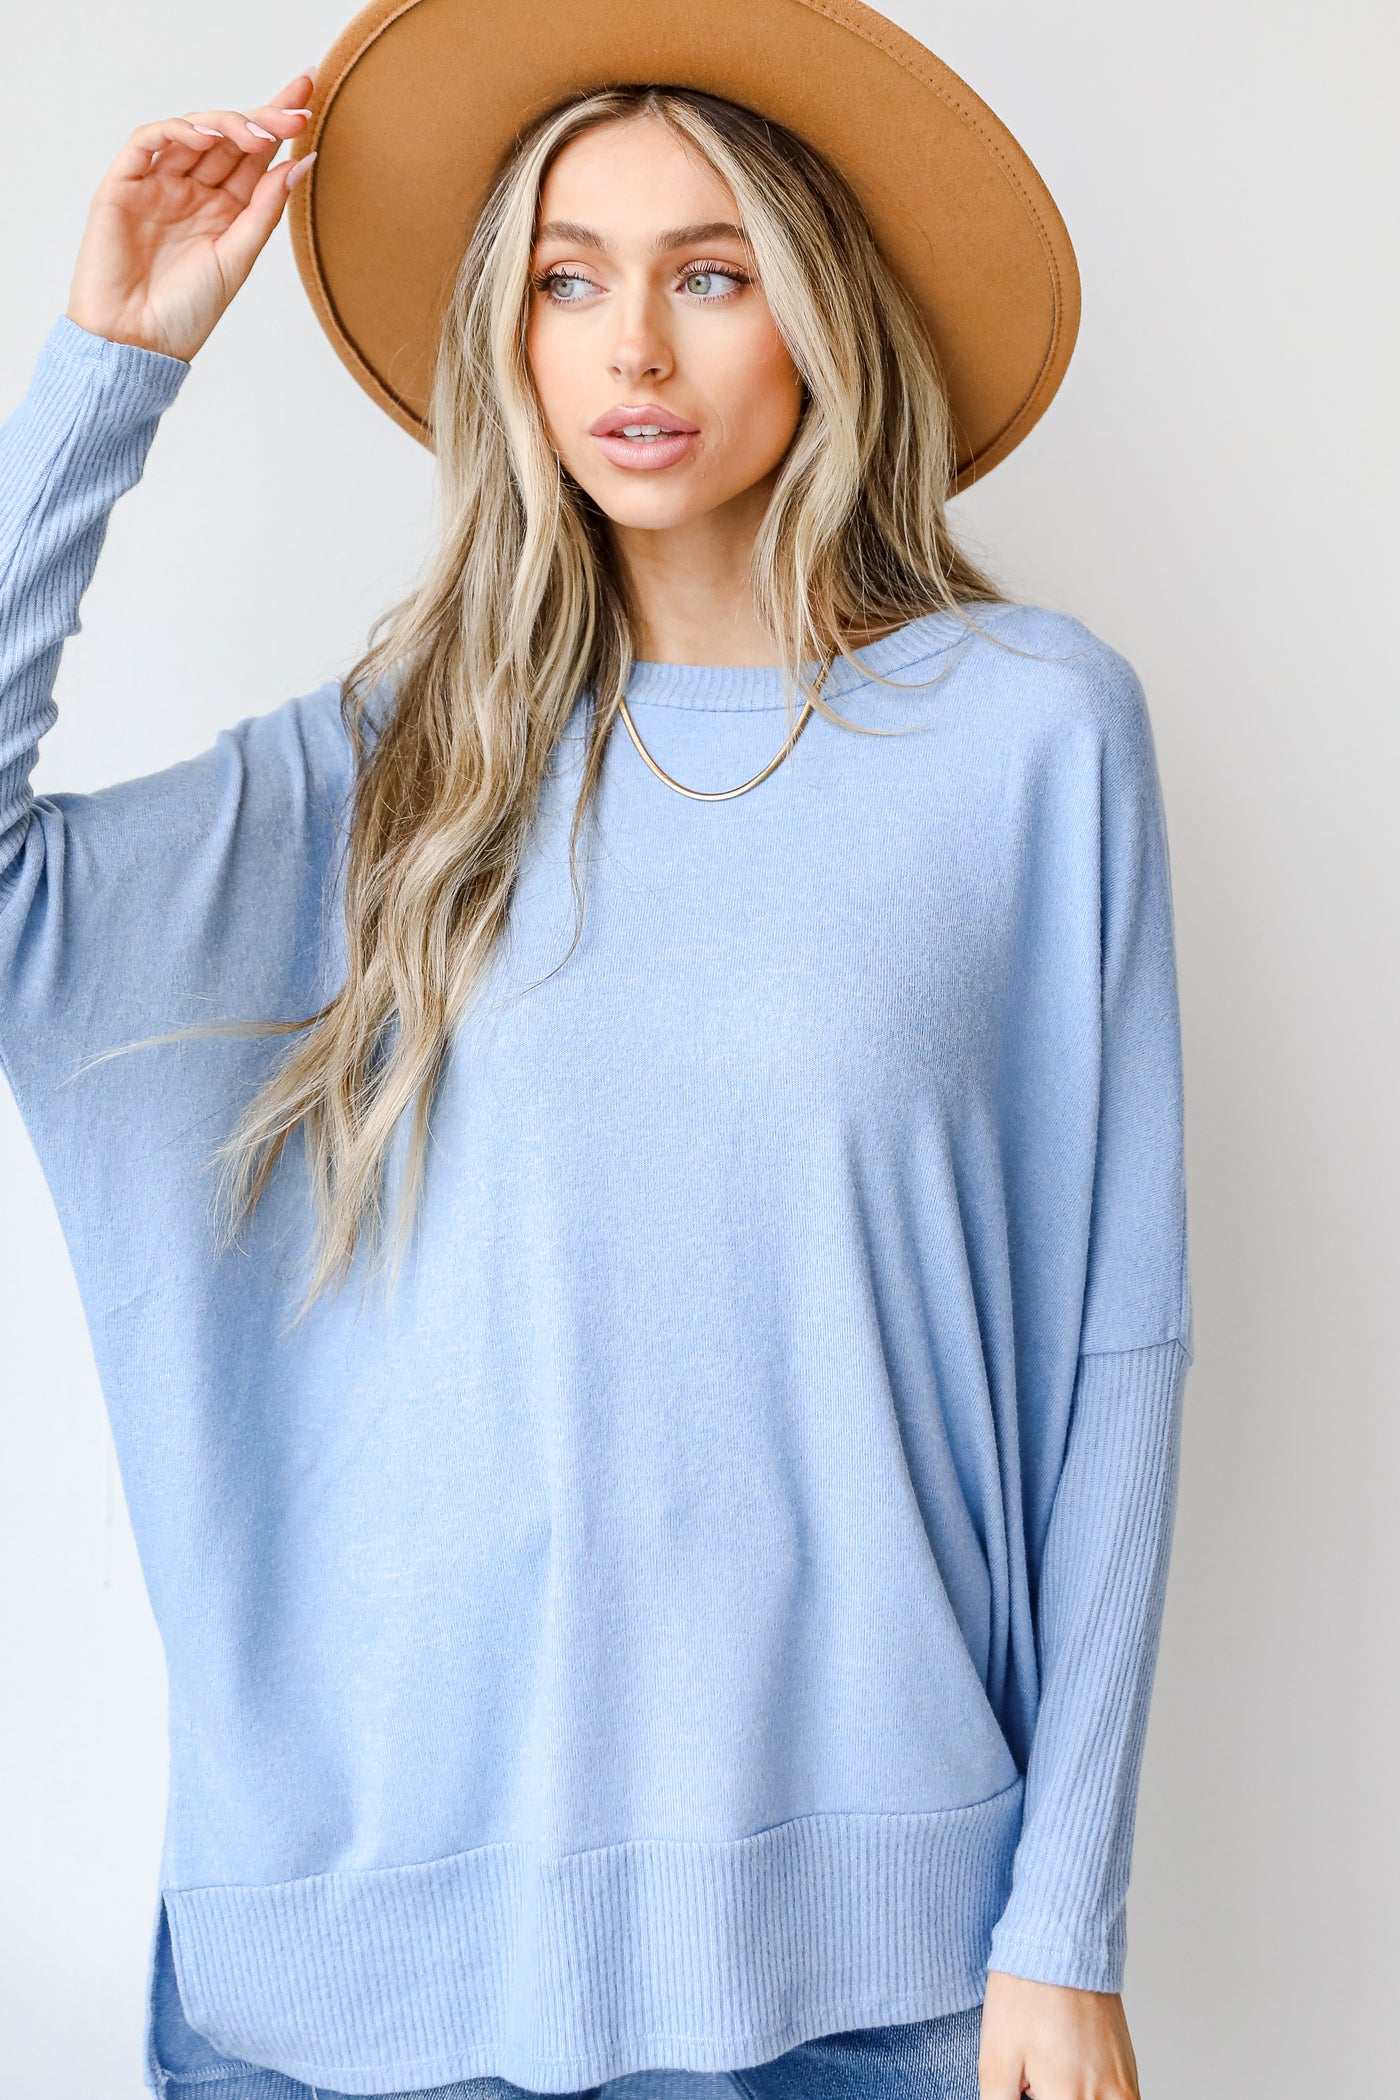 Brushed Knit Top in blue front view